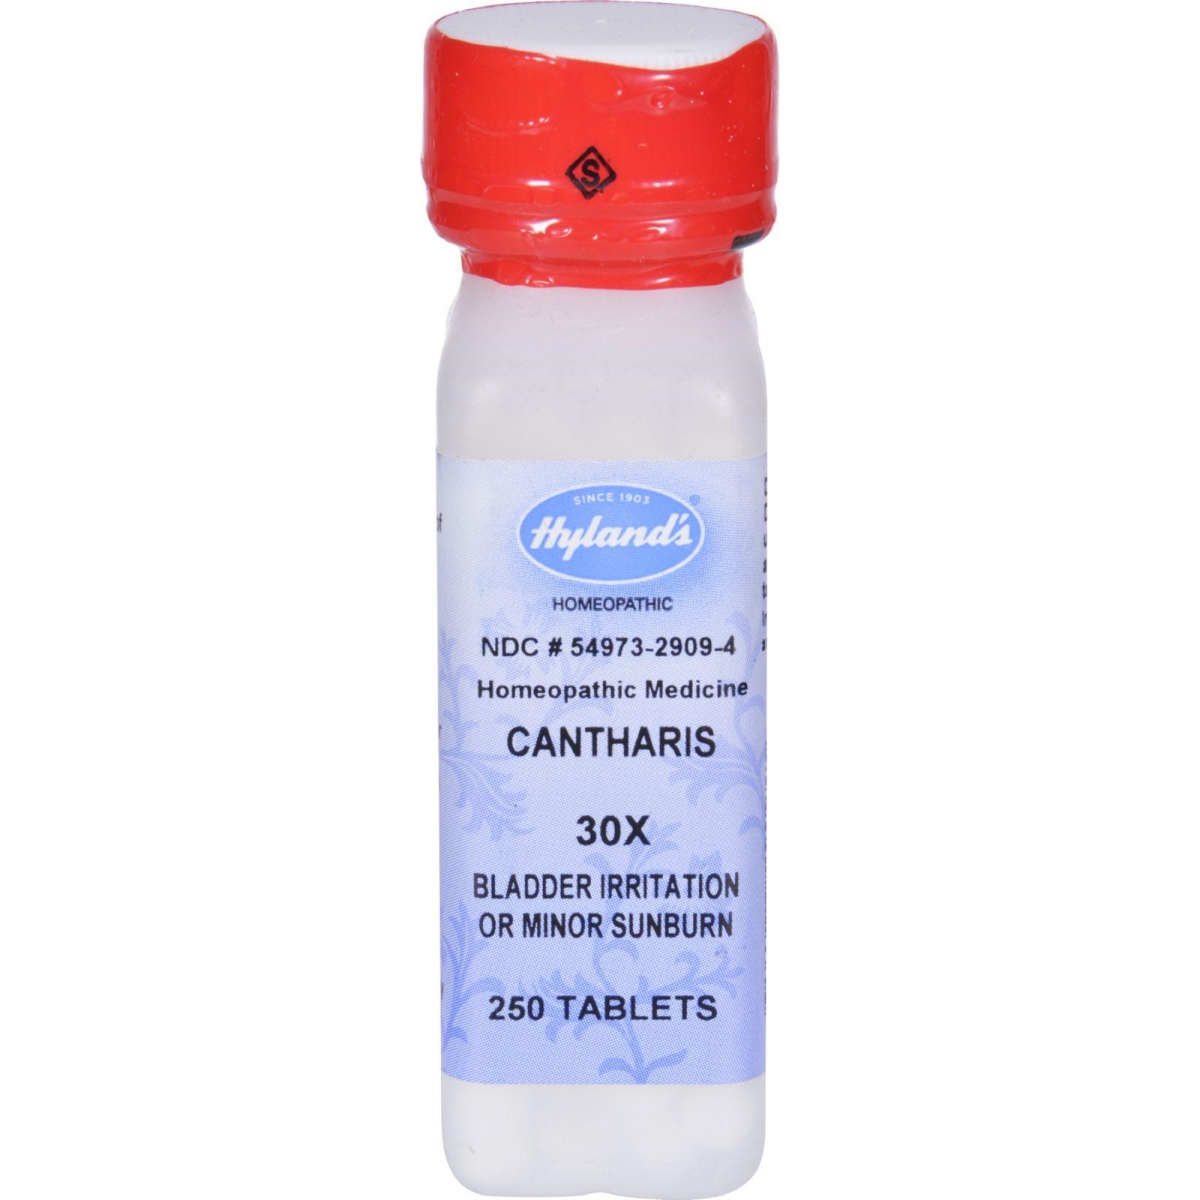 Hg0129965 Cantharis 30x, 250 Tablets